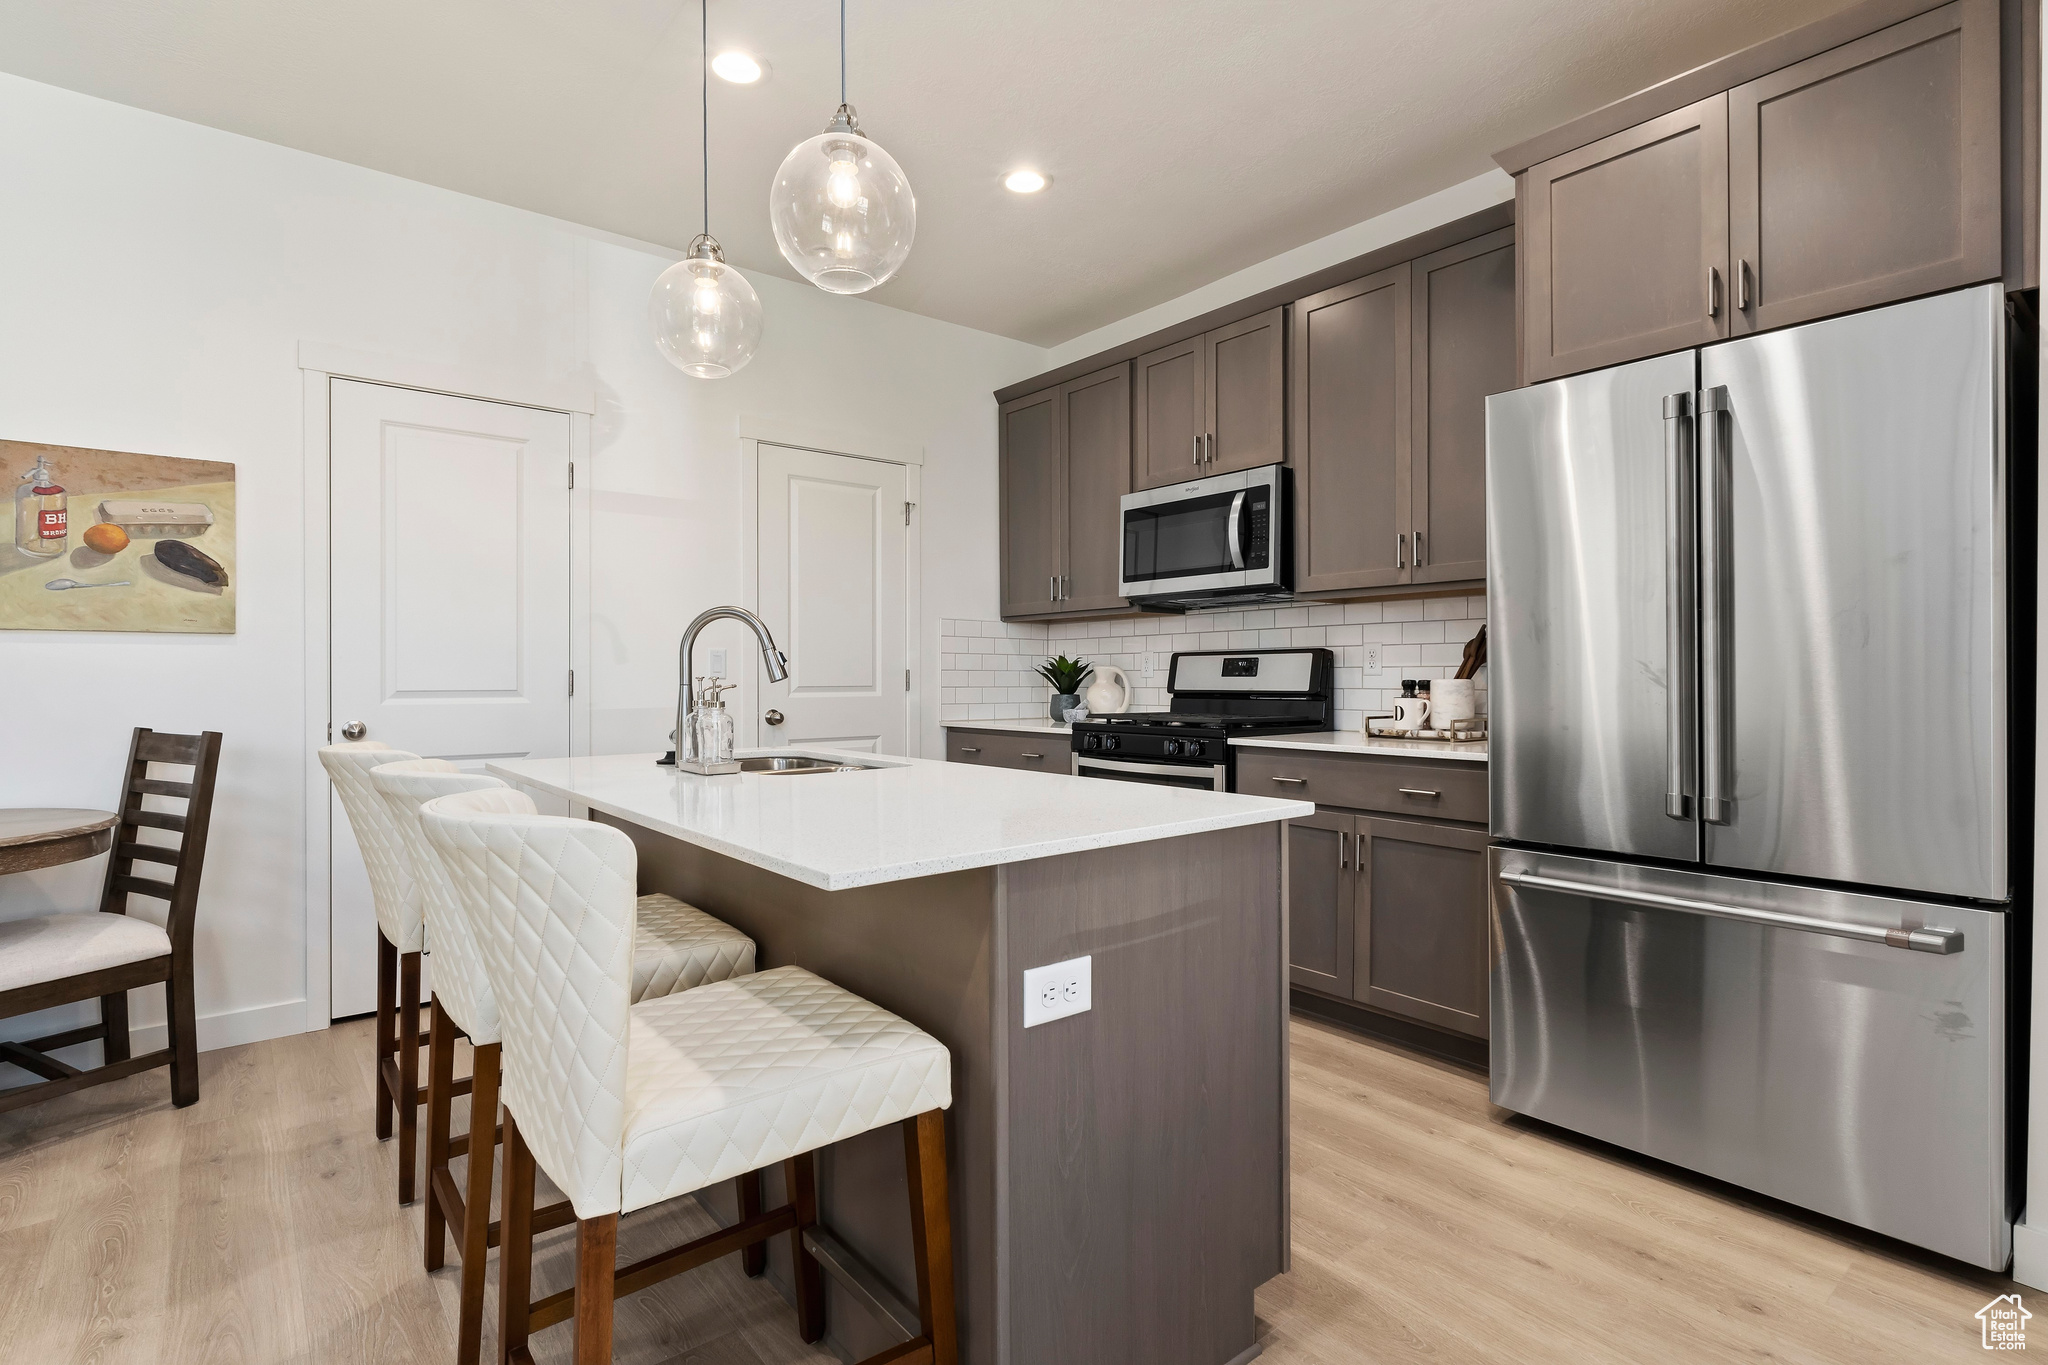 Kitchen featuring appliances with stainless steel finishes, light hardwood / wood-style flooring, hanging light fixtures, tasteful backsplash, and sink